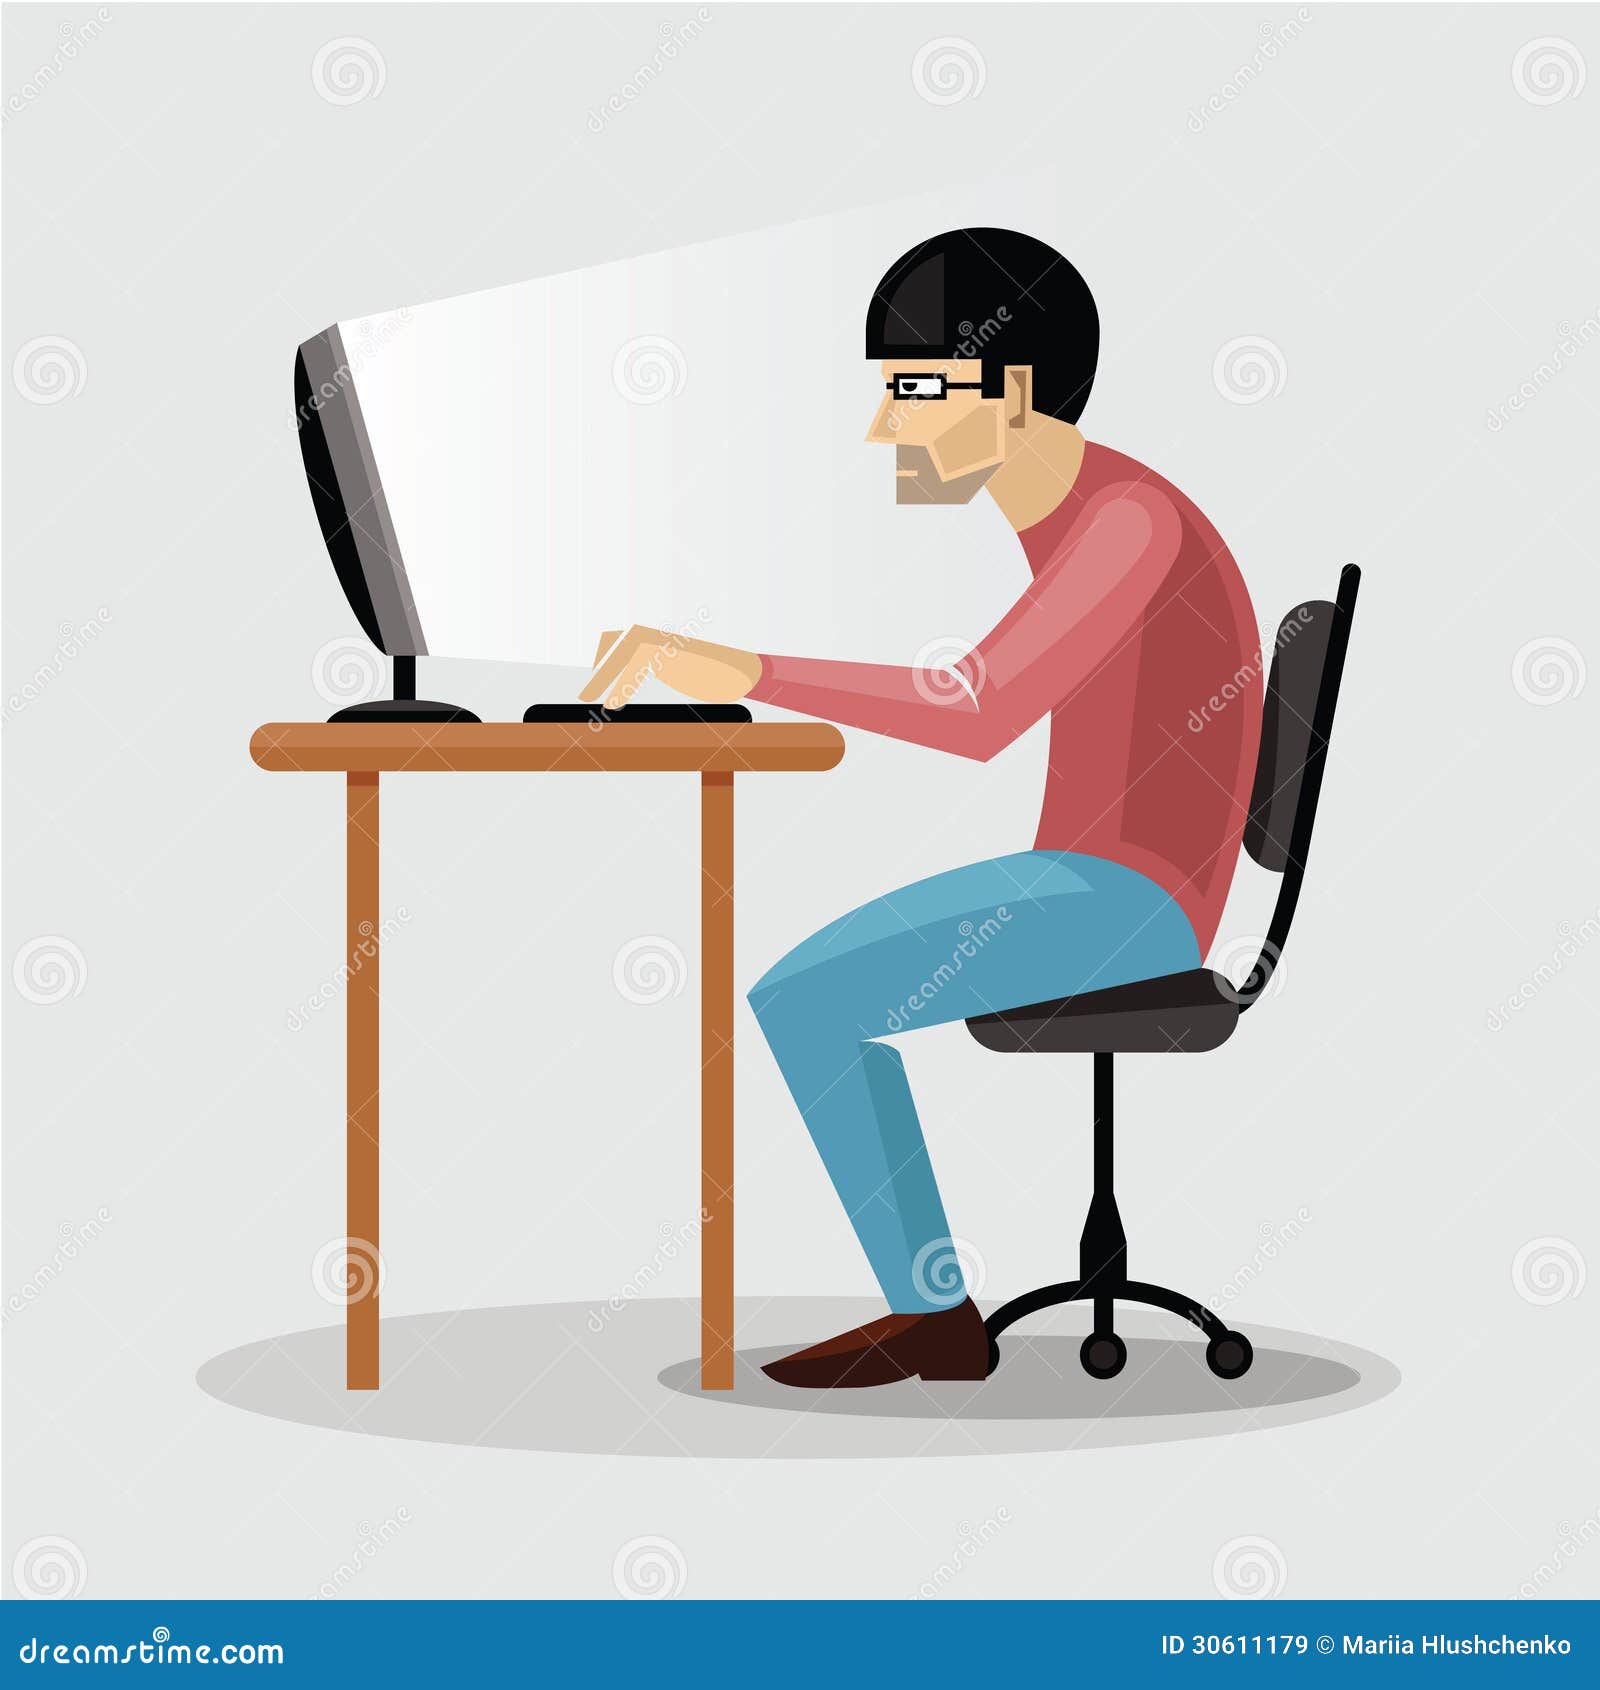 clipart man with laptop - photo #24